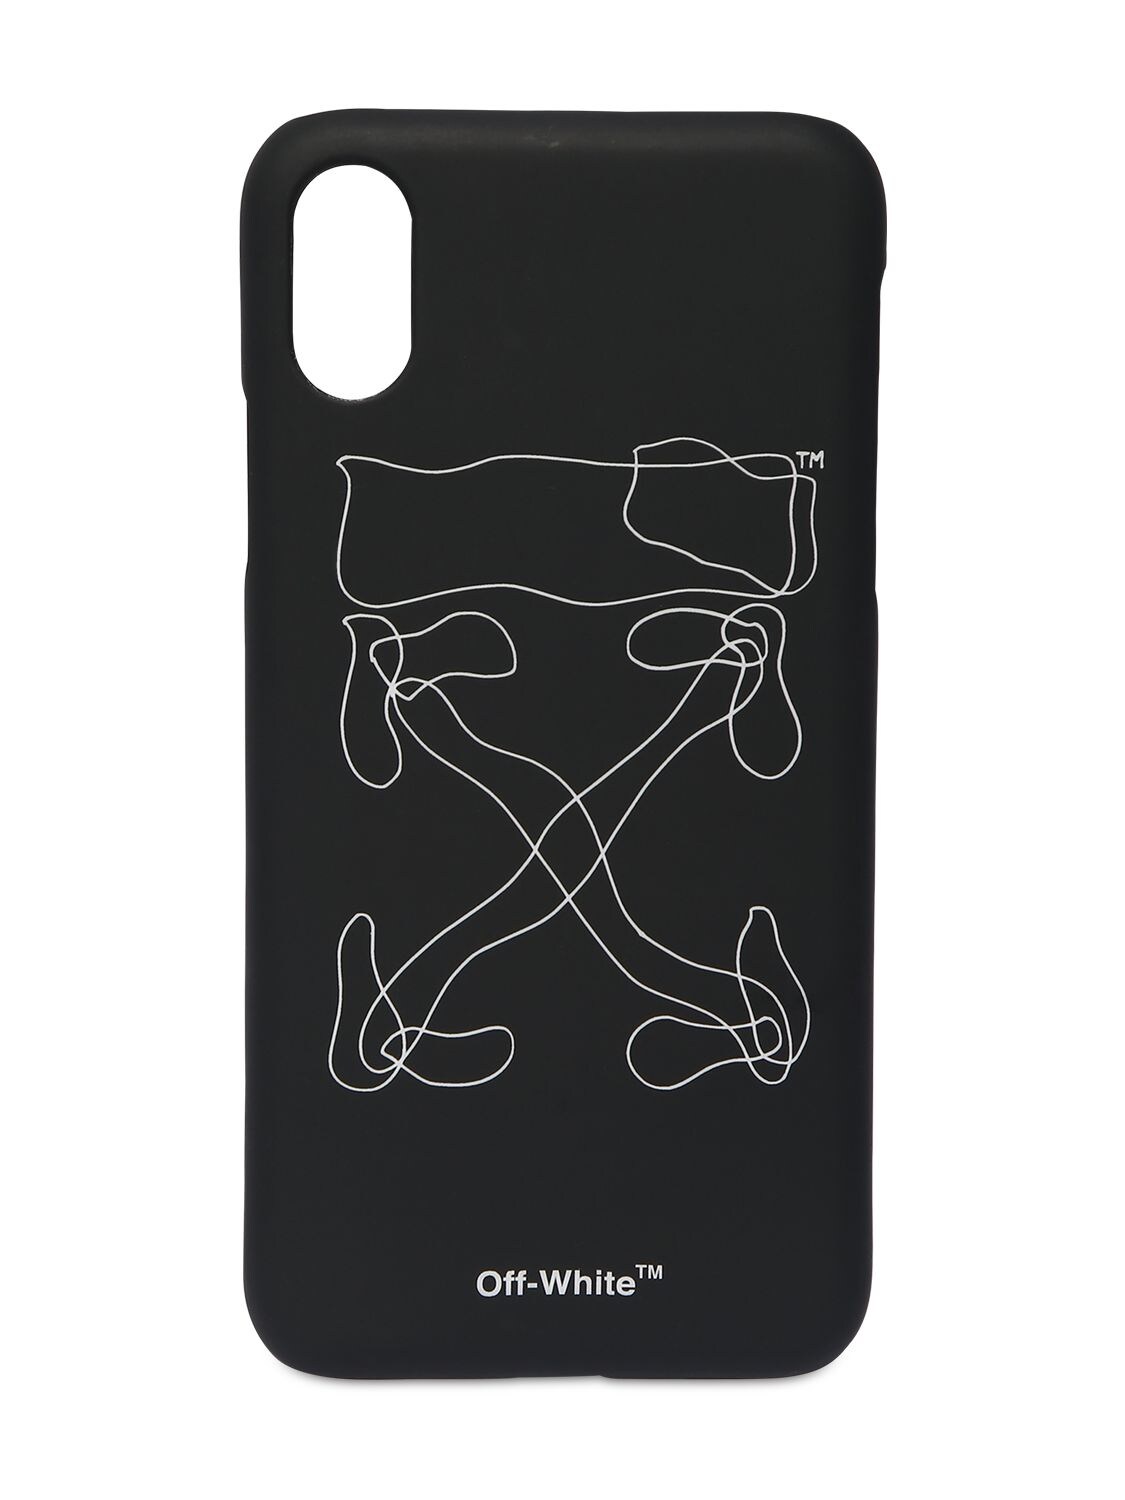 OFF-WHITE ABSTRACT ARROWS TECH IPHONE X/XS COVER,70IJS5024-MTAWMQ2